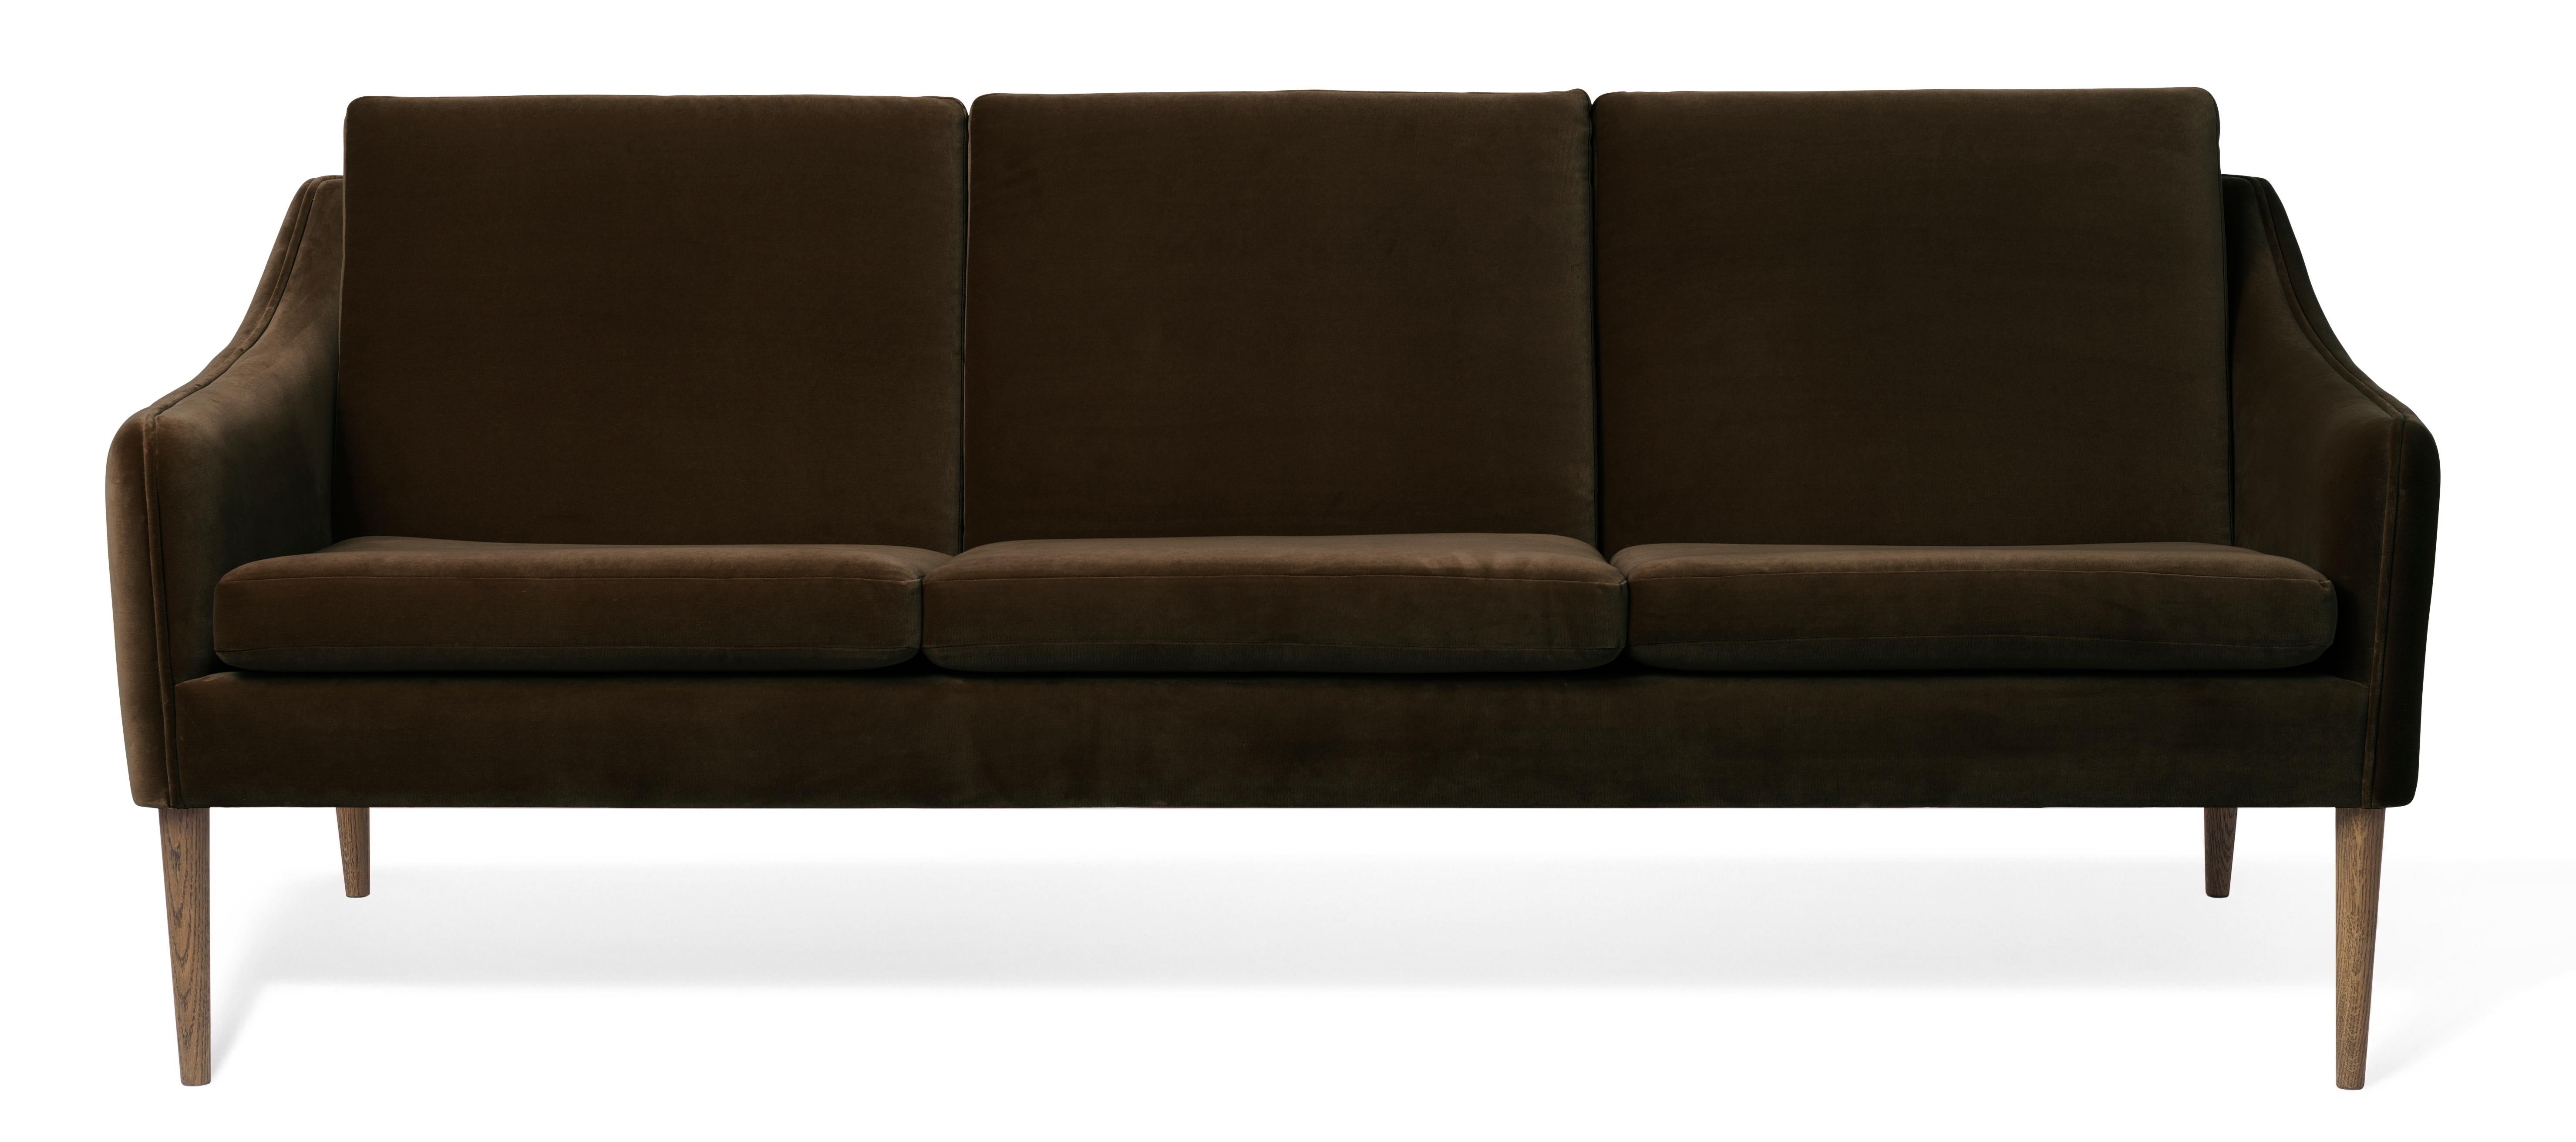 For Sale: Brown (Ritz 8513) Mr. Olsen 3-Seat Sofa with Smoked Oak Legs, by Hans Olsen from Warm Nordic